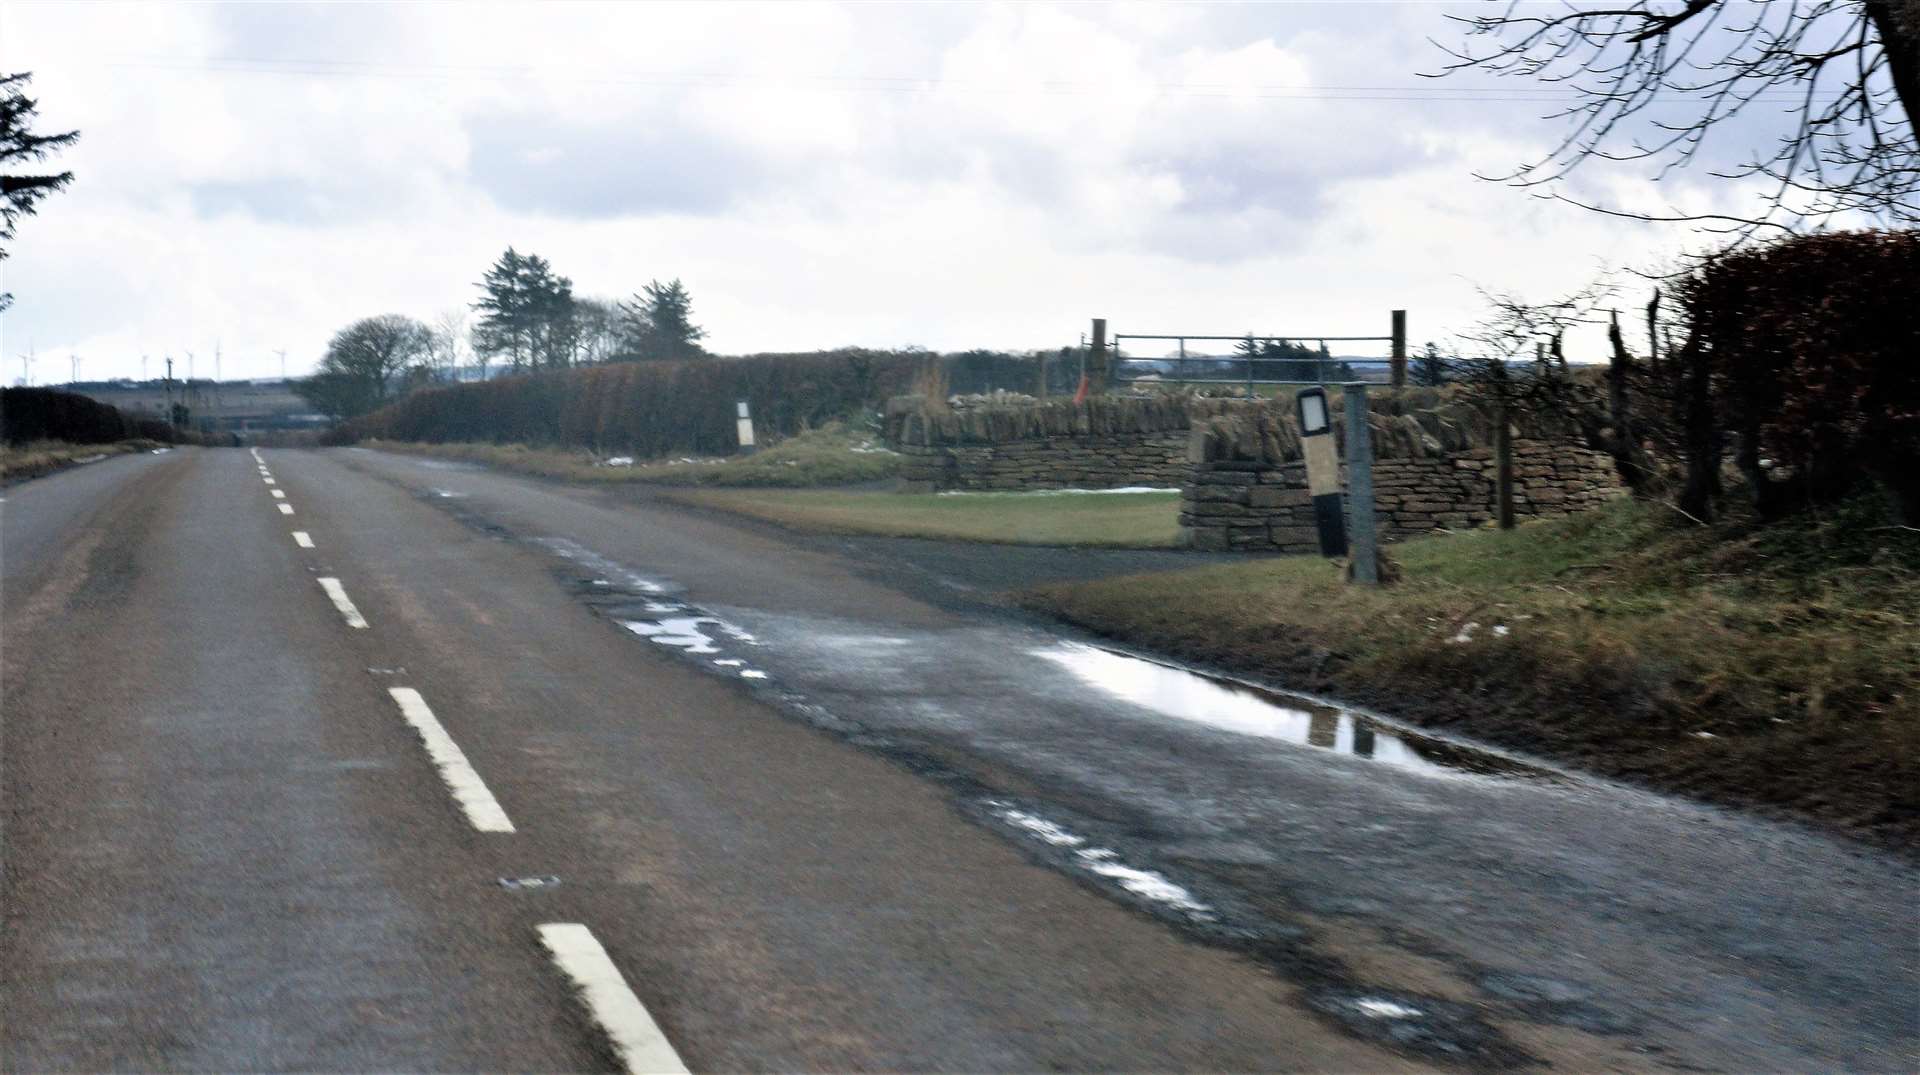 A line of potholes visible on the A882 near Oldhall on Sunday afternoon. Pictures: DGS